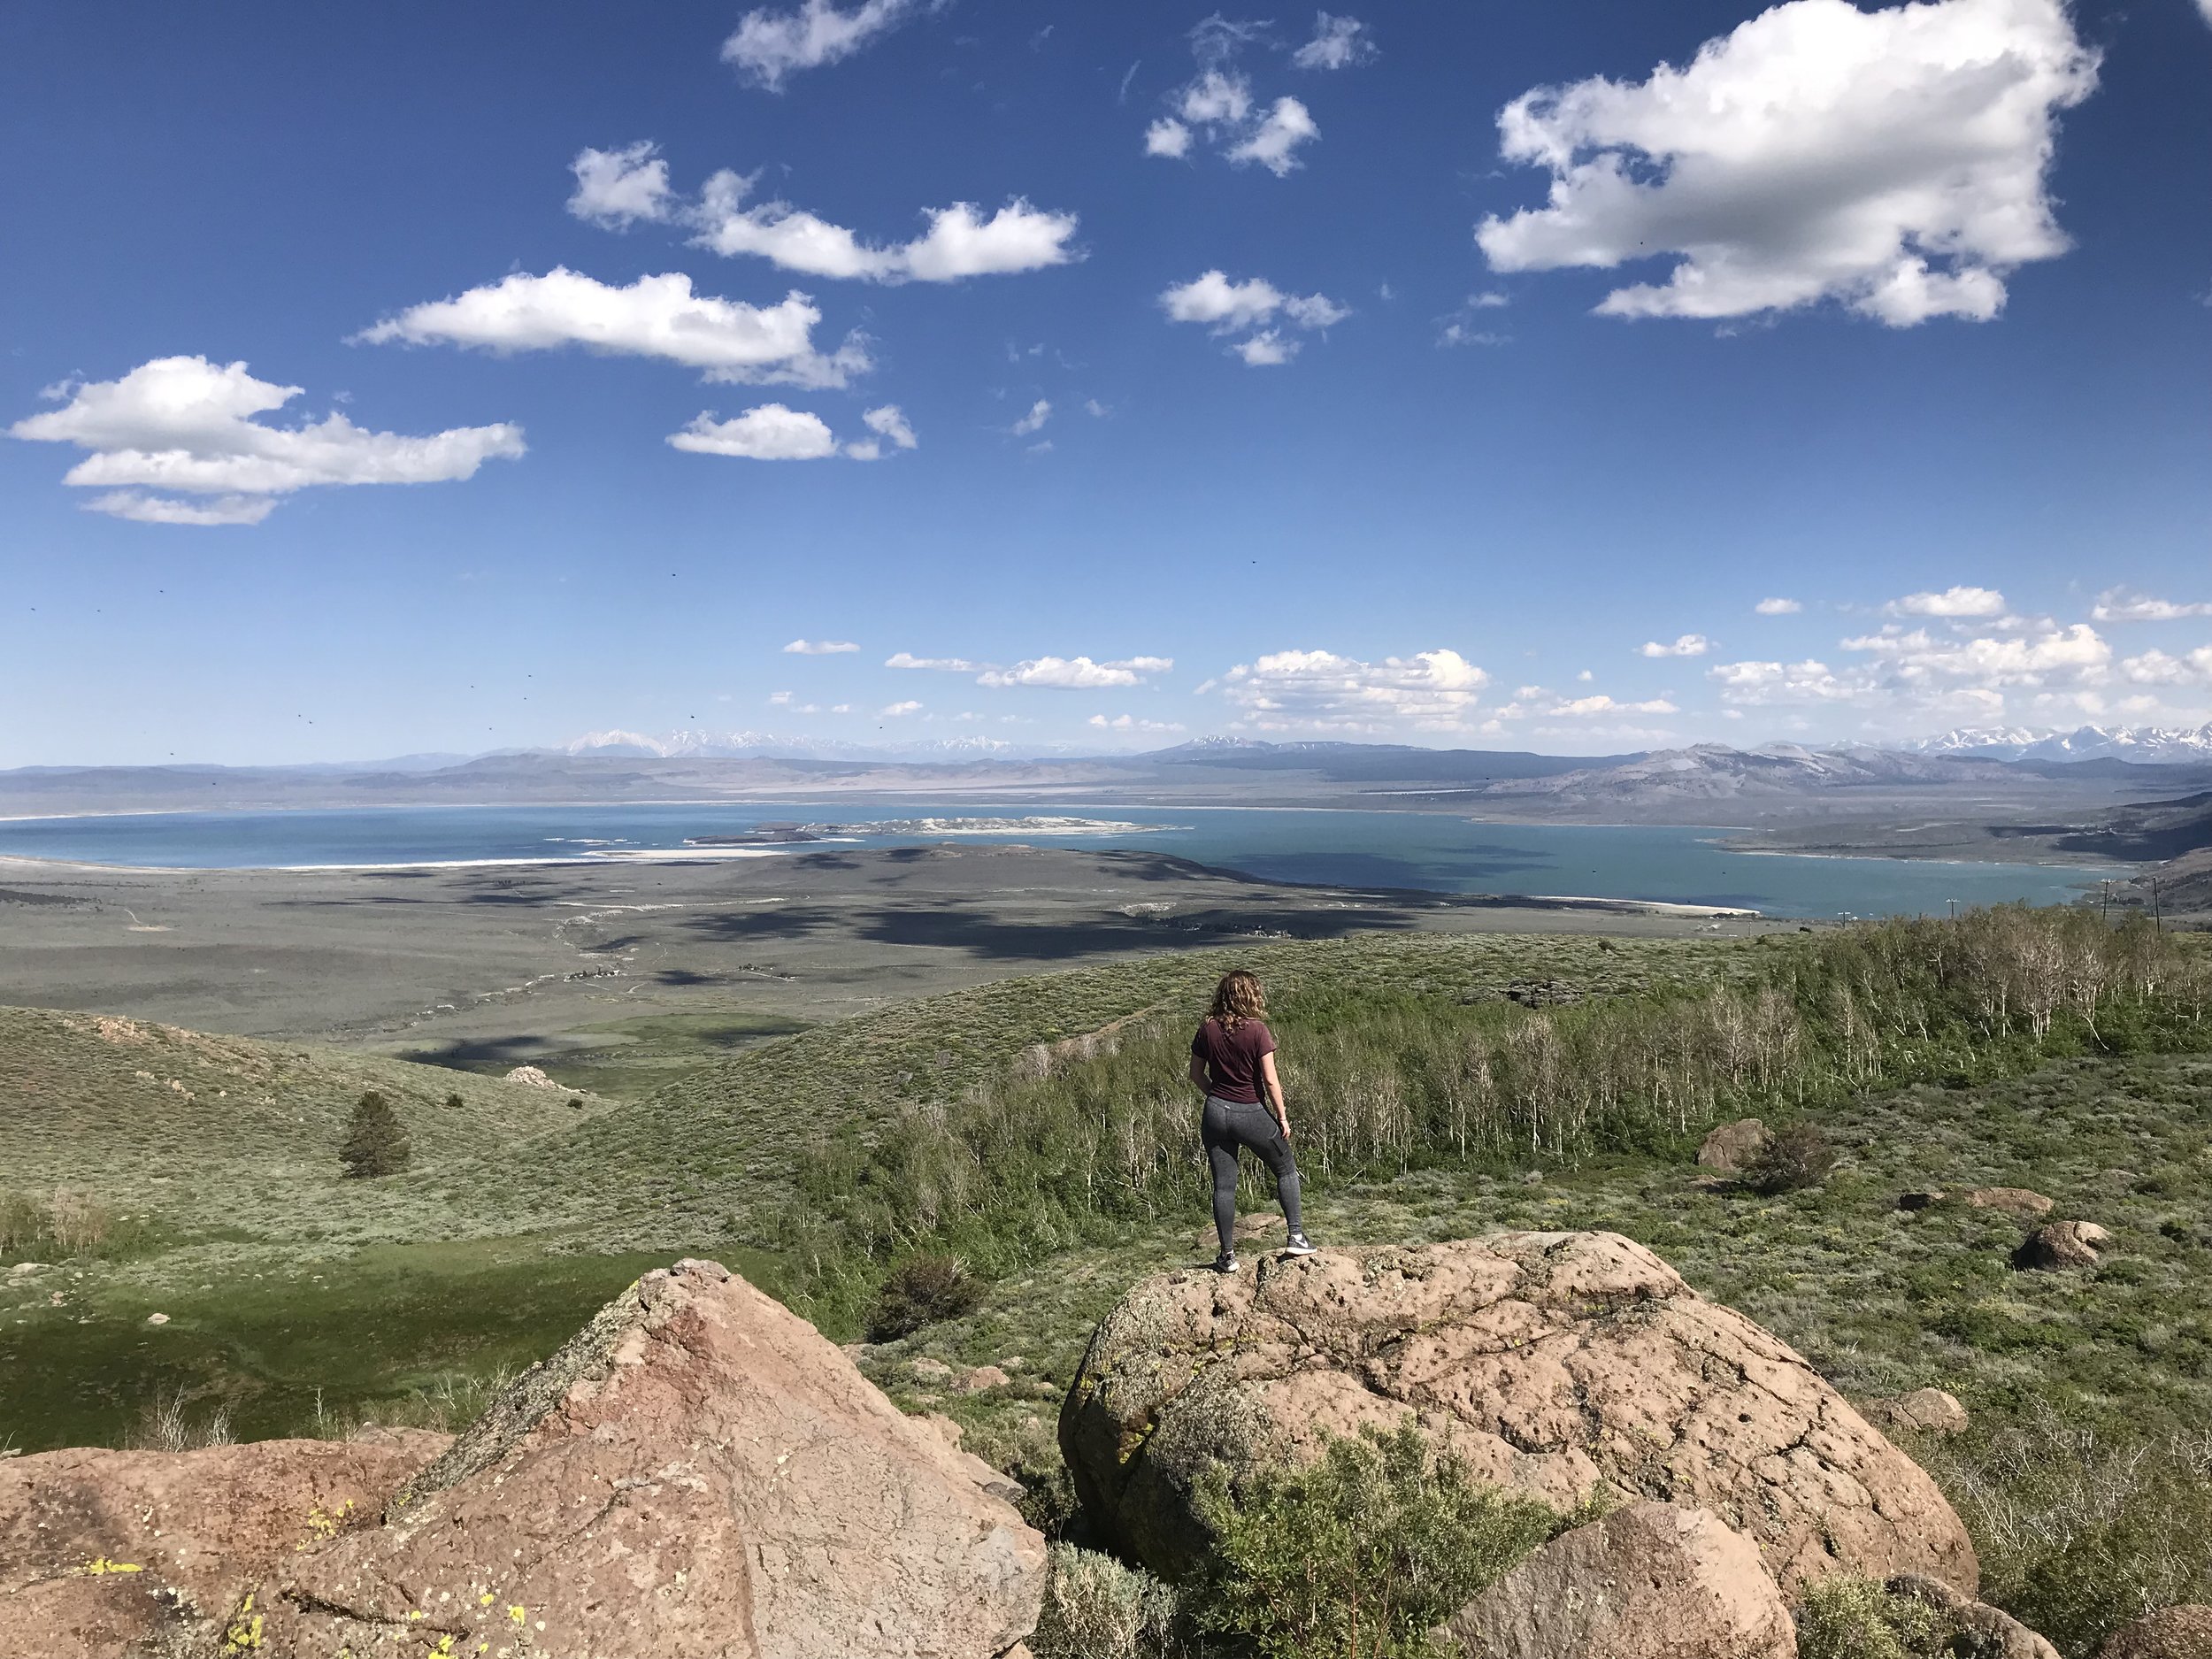 MONO LAKE VIEW FROM ABOVE